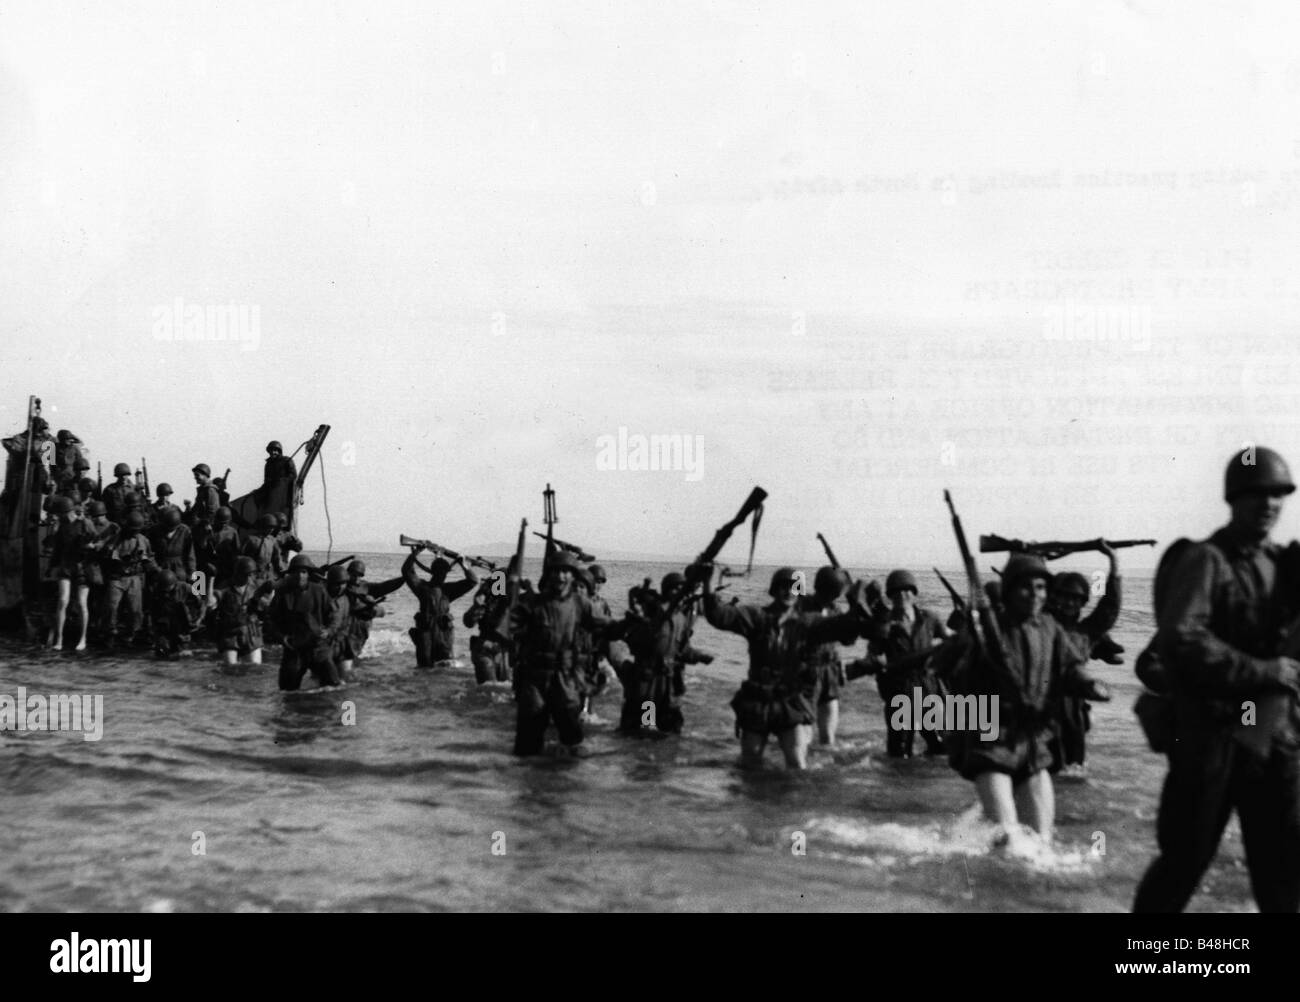 events, Second World War / WWII, North Africa, Algeria, a company of US Rangers during maneuvers, 20.12.1942, Stock Photo